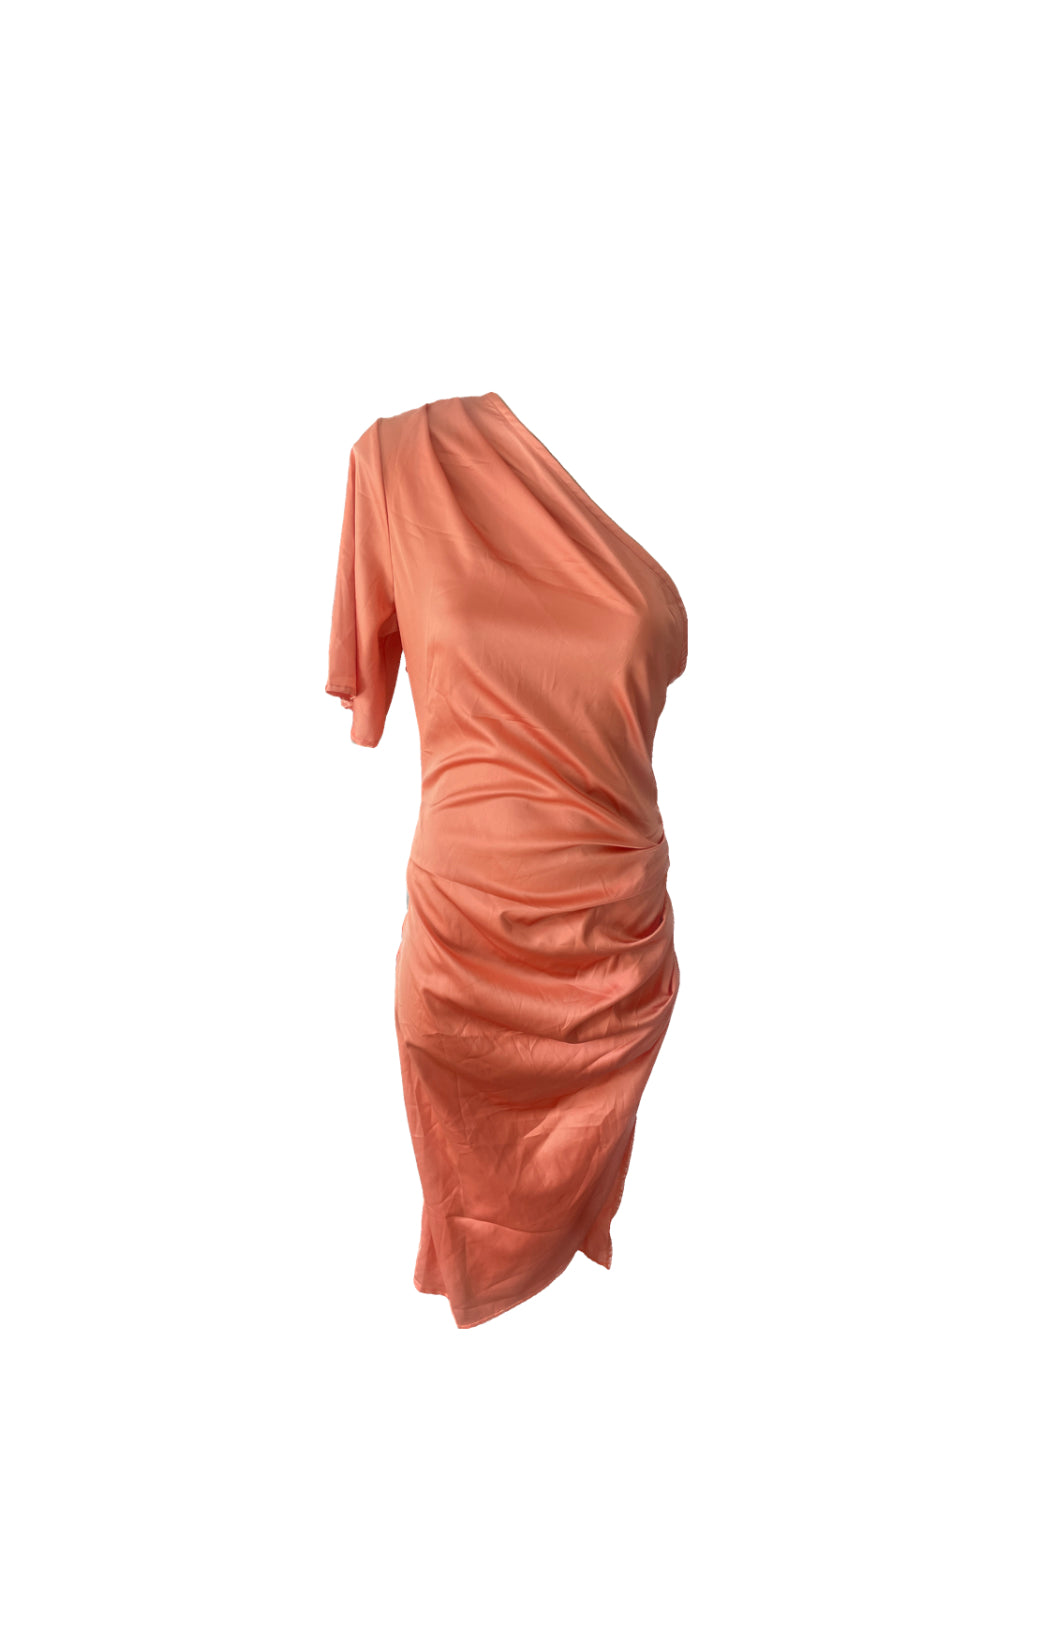 one shoulder salmon peach colour dress mid length ruched side from CBR label front view